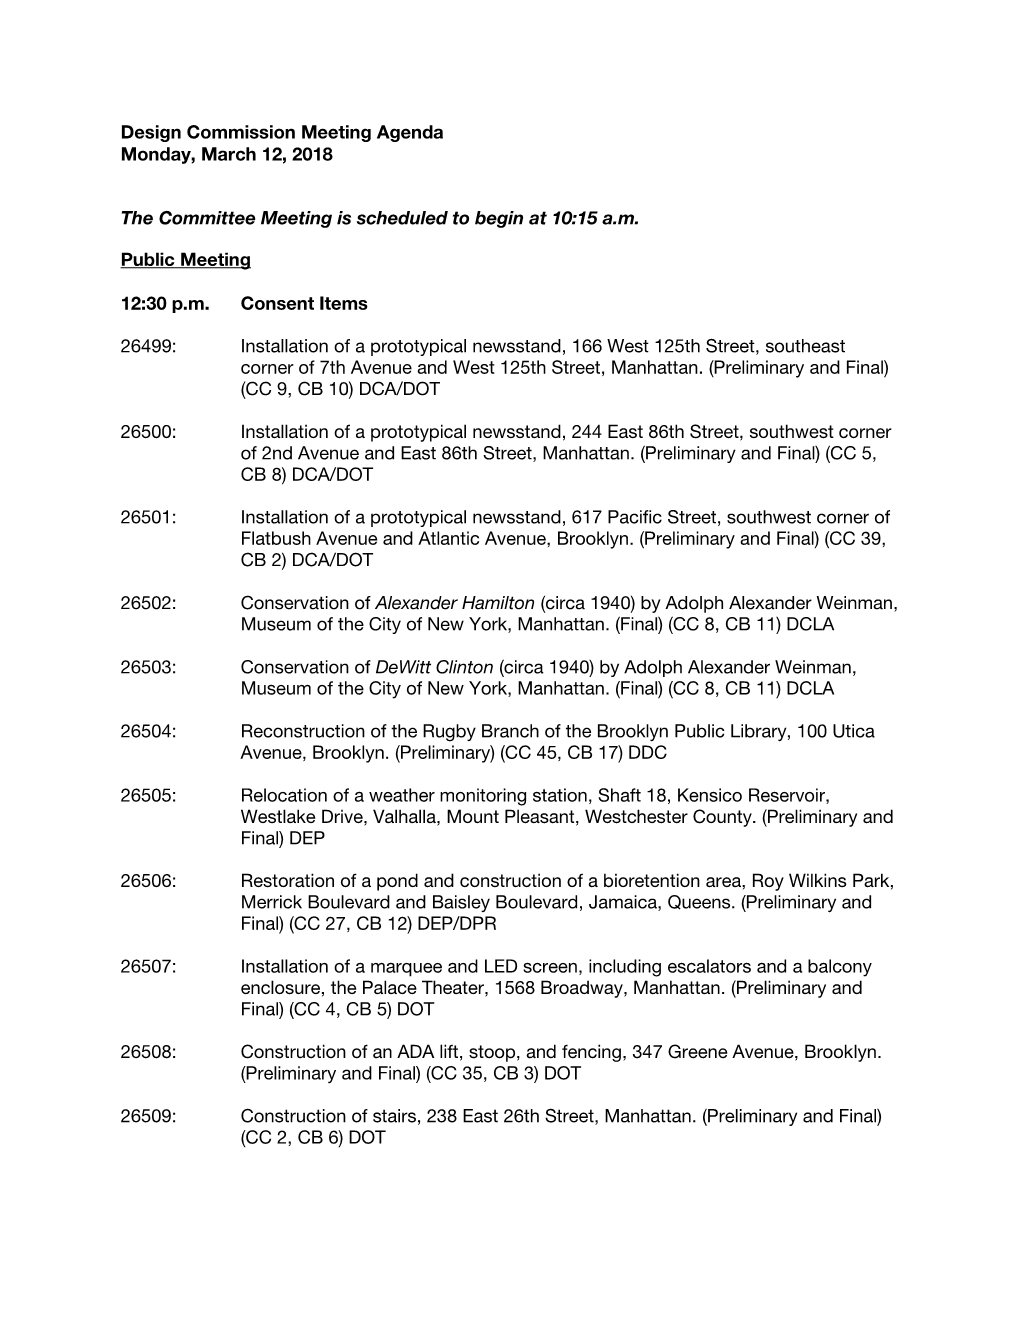 Design Commission Meeting Agenda Monday, March 12, 2018